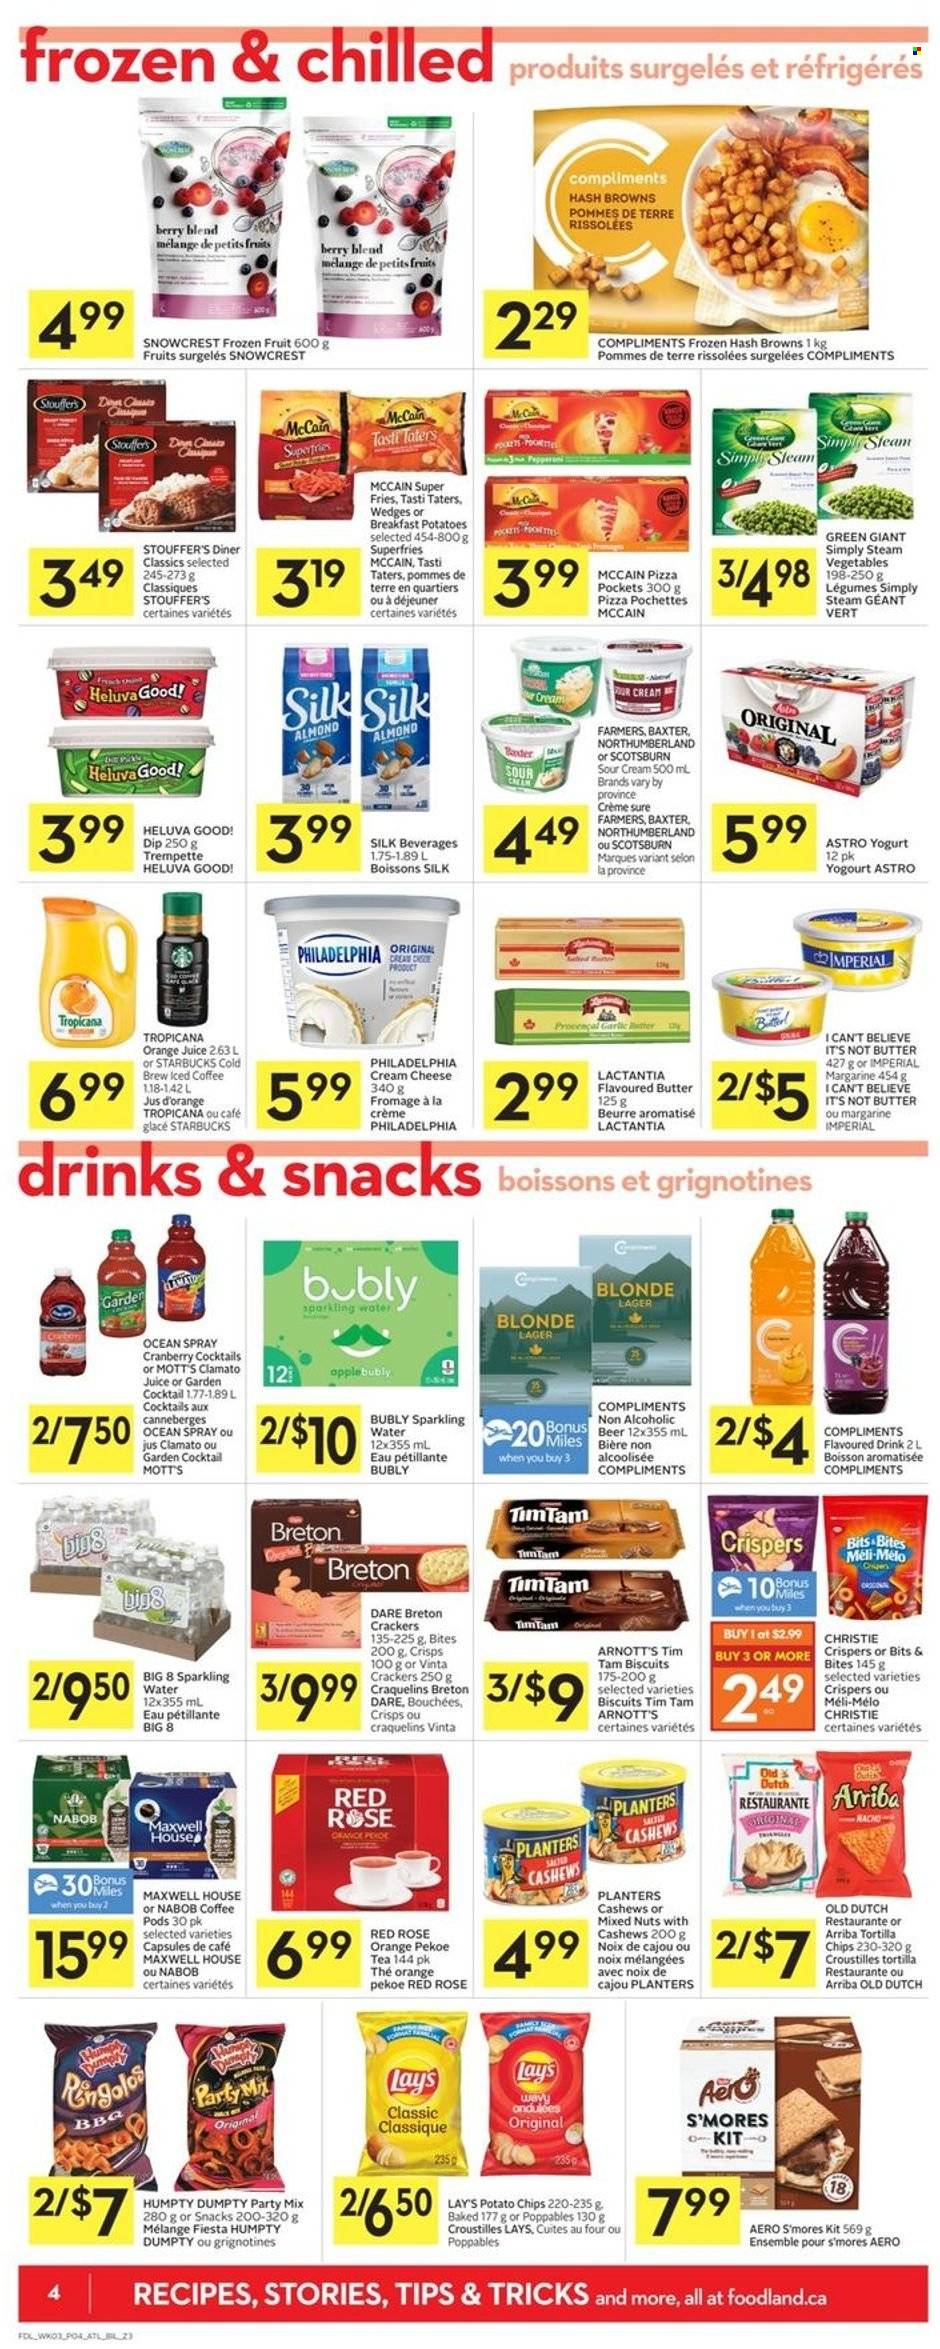 thumbnail - Co-op Flyer - May 19, 2022 - May 25, 2022 - Sales products - garlic, Mott's, pizza, cream cheese, yoghurt, butter, margarine, I Can't Believe It's Not Butter, sour cream, dip, Stouffer's, McCain, hash browns, potato fries, crackers, Tim Tam, biscuit, tortilla chips, potato chips, Lay’s, cashews, mixed nuts, Planters, orange juice, juice, Clamato, sparkling water, iced coffee, Maxwell House, tea, coffee pods, Starbucks, wine, rosé wine, beer, Lager, Philadelphia. Page 4.